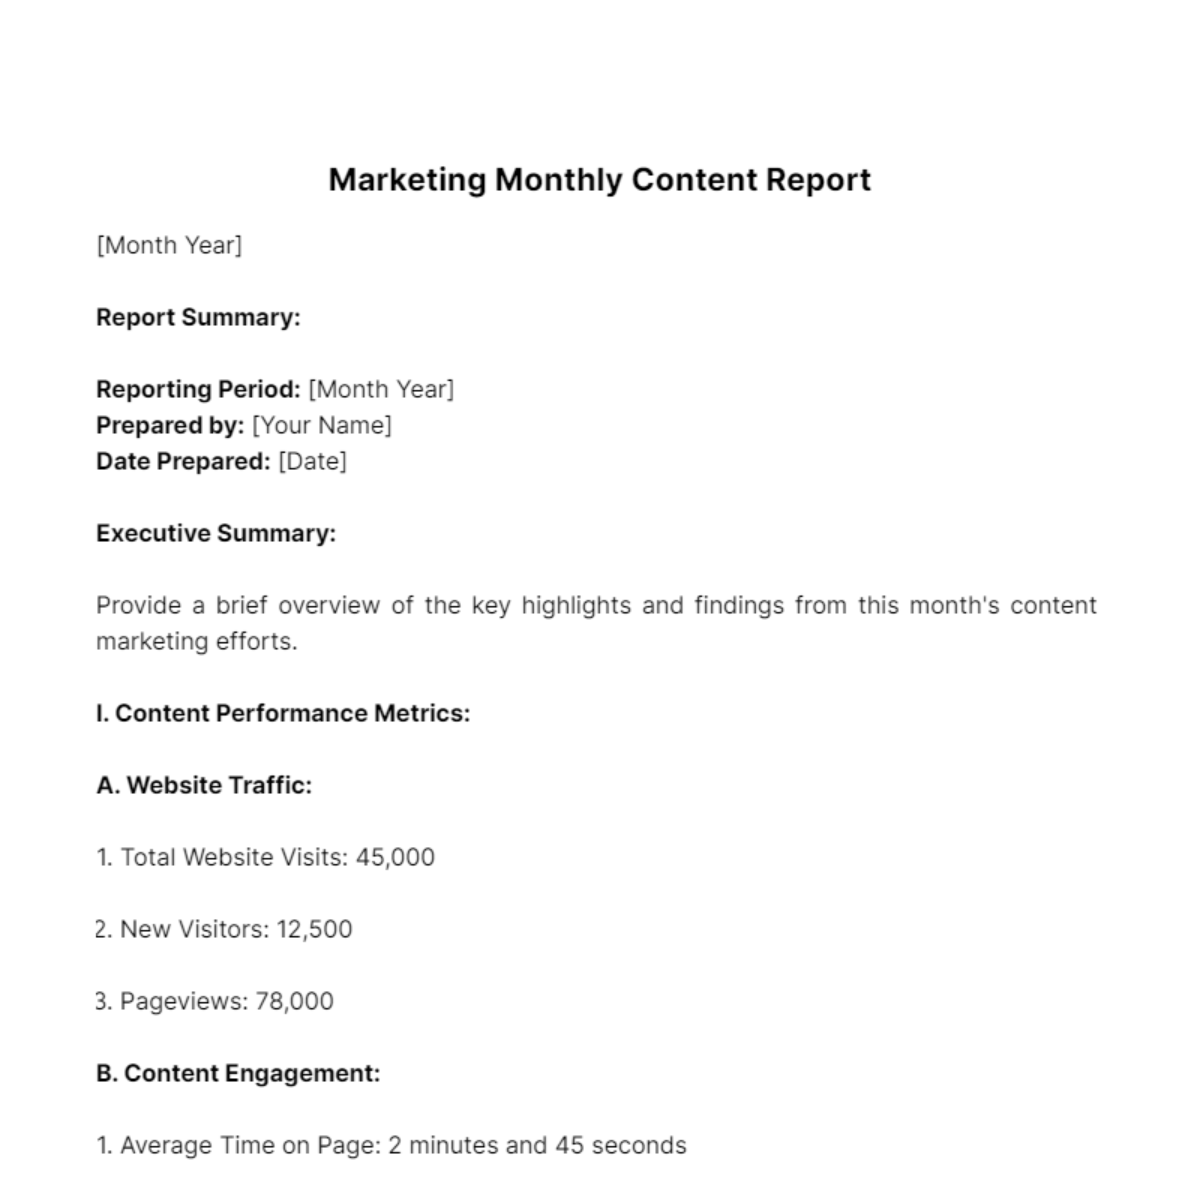 Marketing Monthly Content Report Template